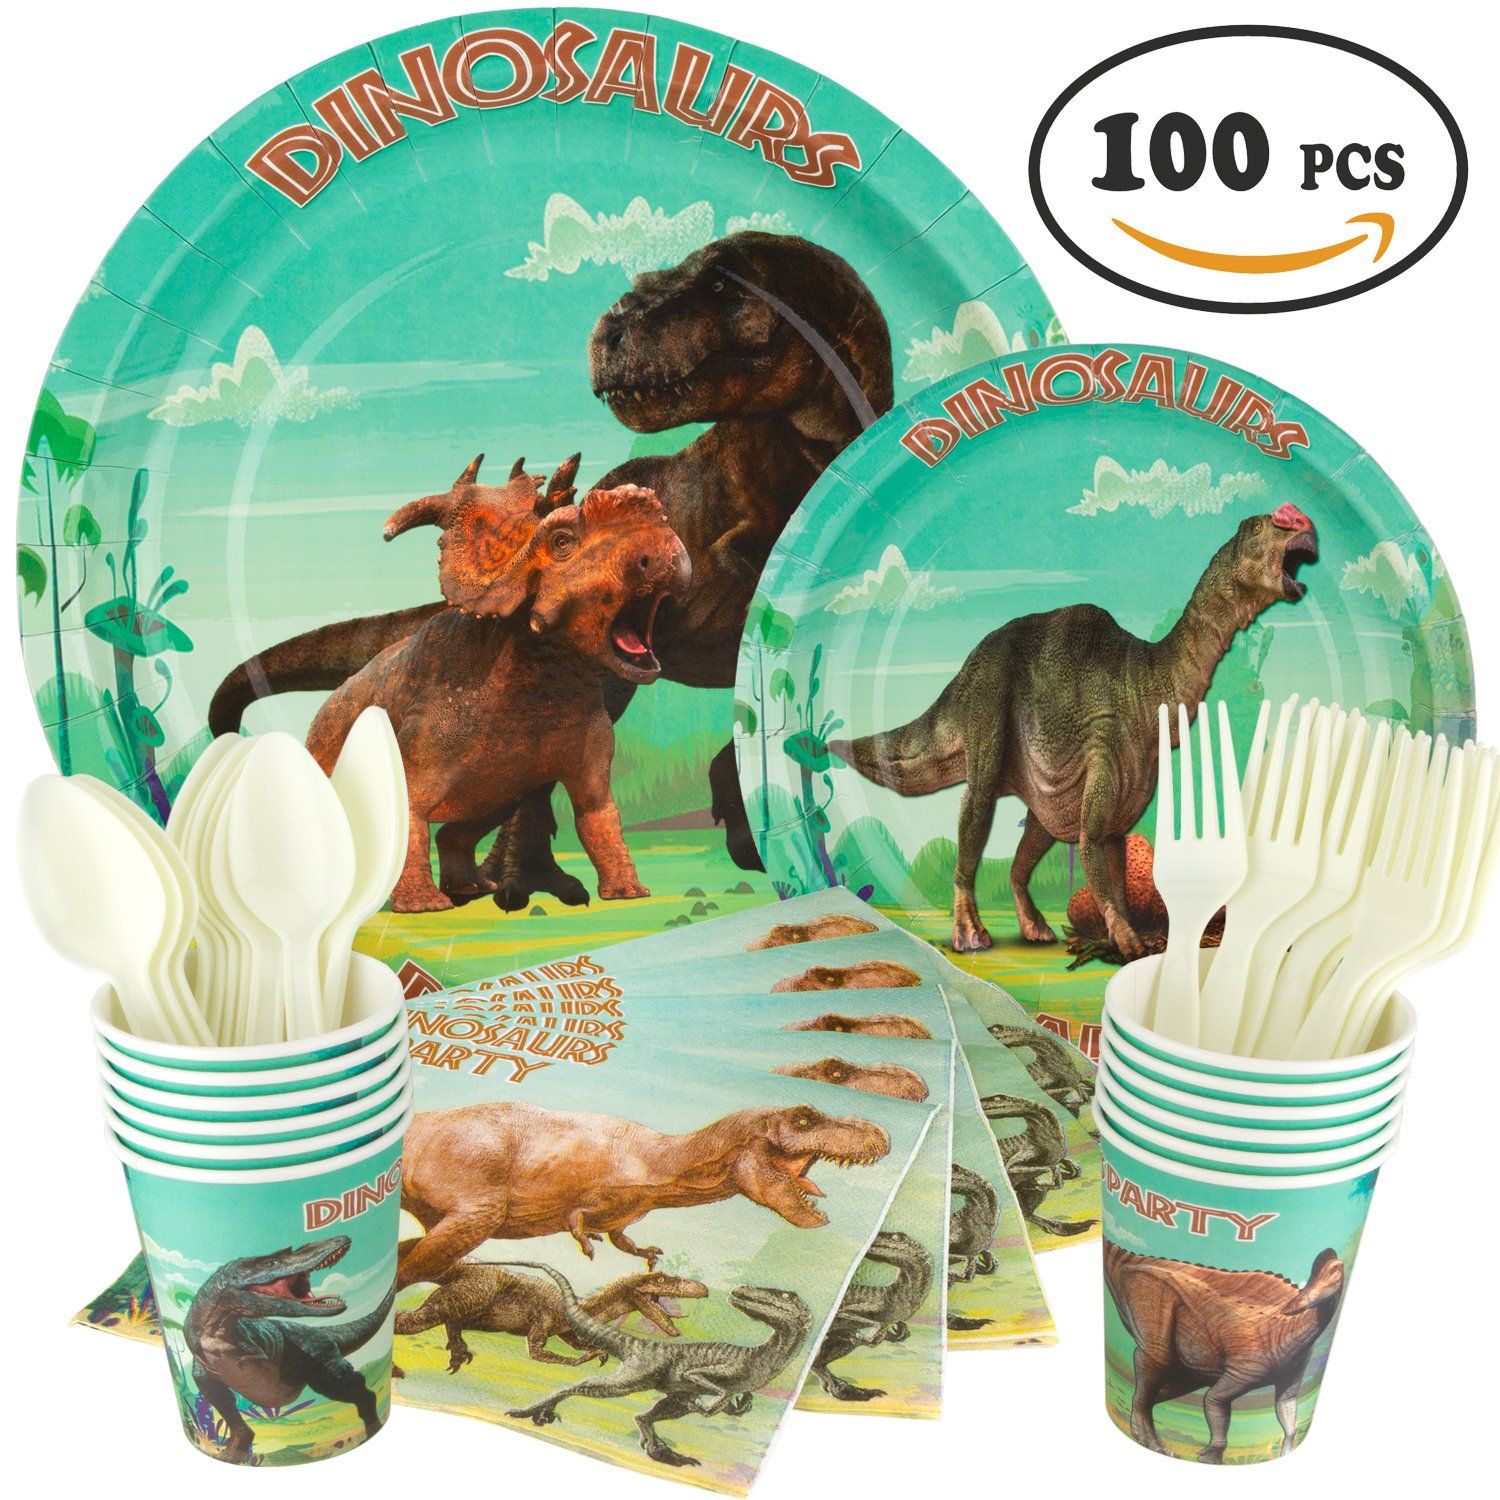 Dinosaur party plates and napkins - Best DinoMite Birthday Party Ideas